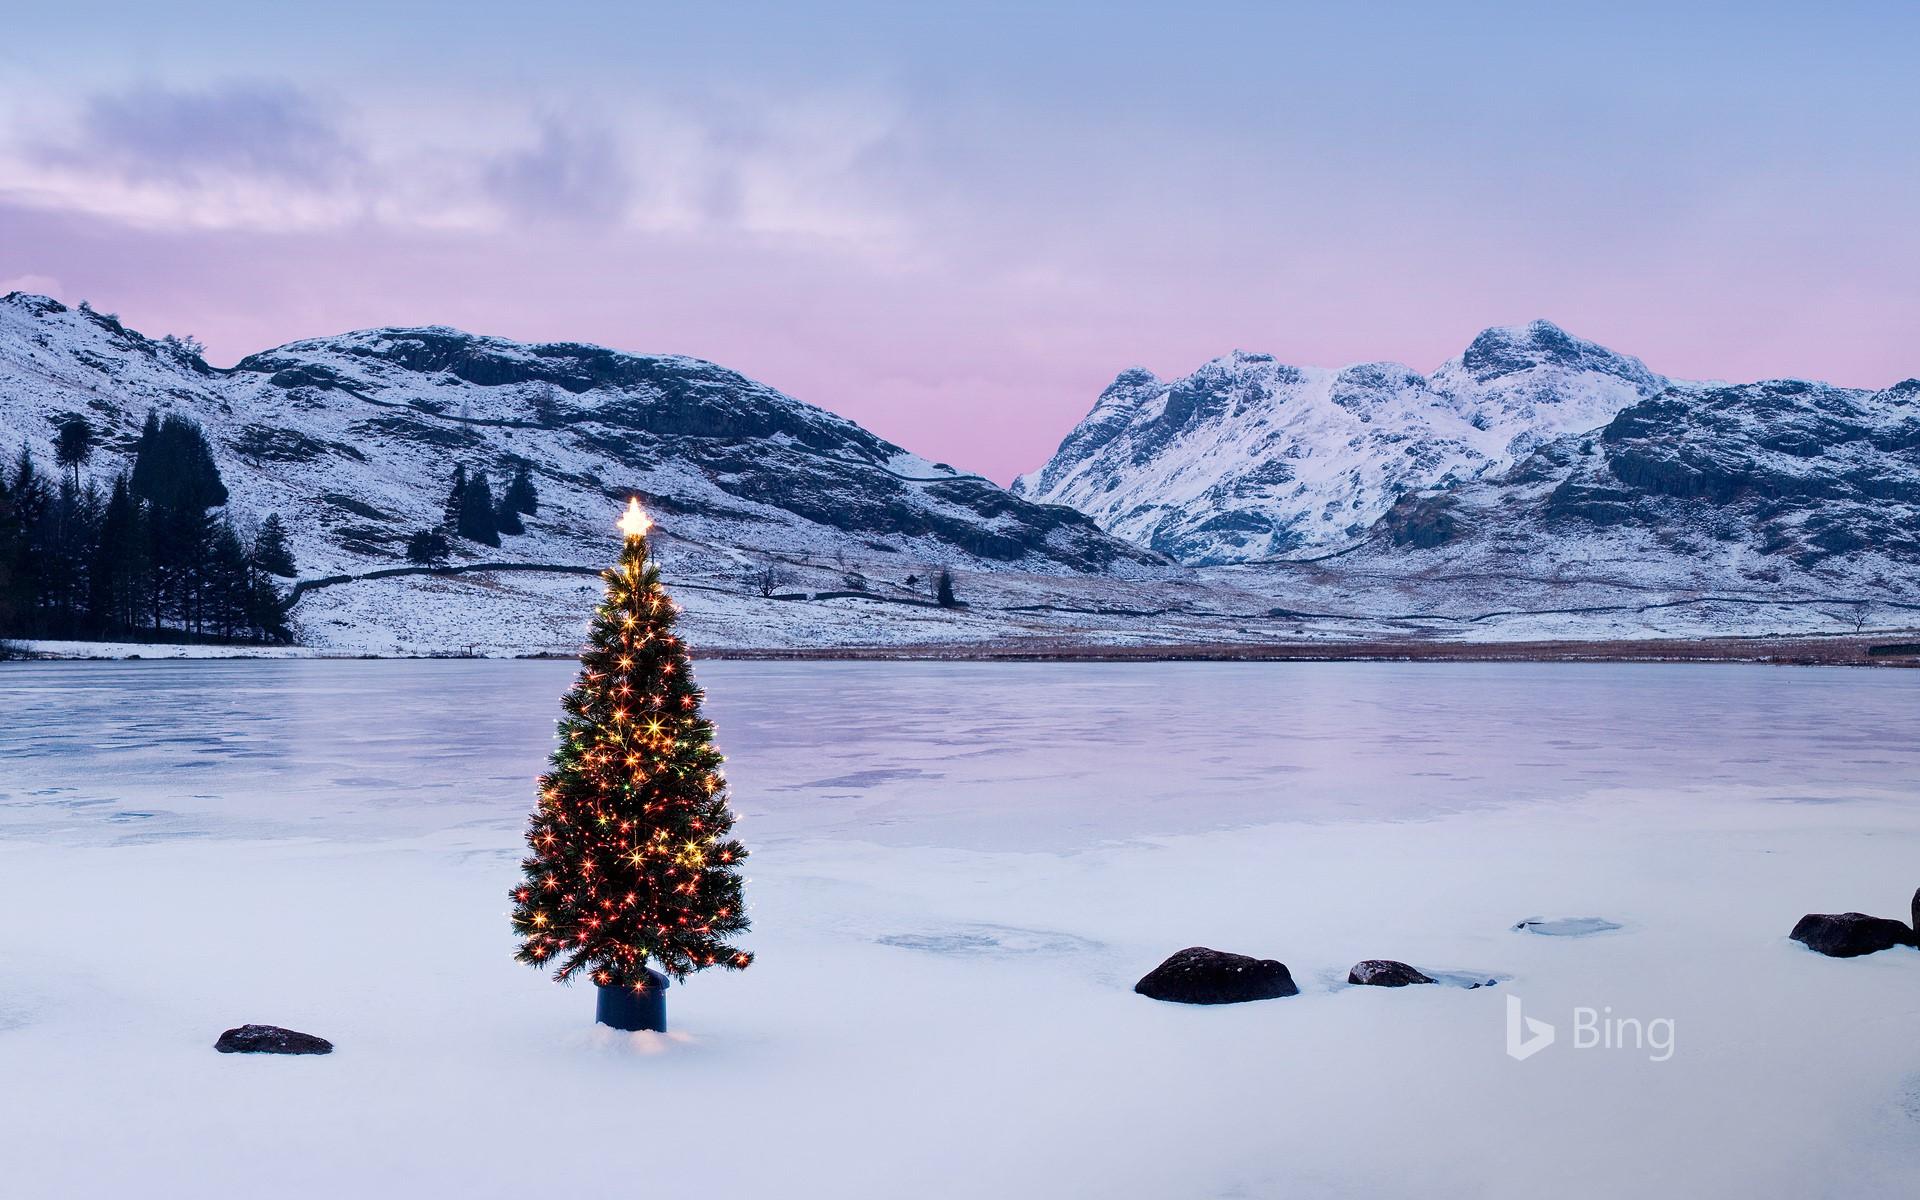 The Langdale Pikes with an illuminated Christmas tree, Lake